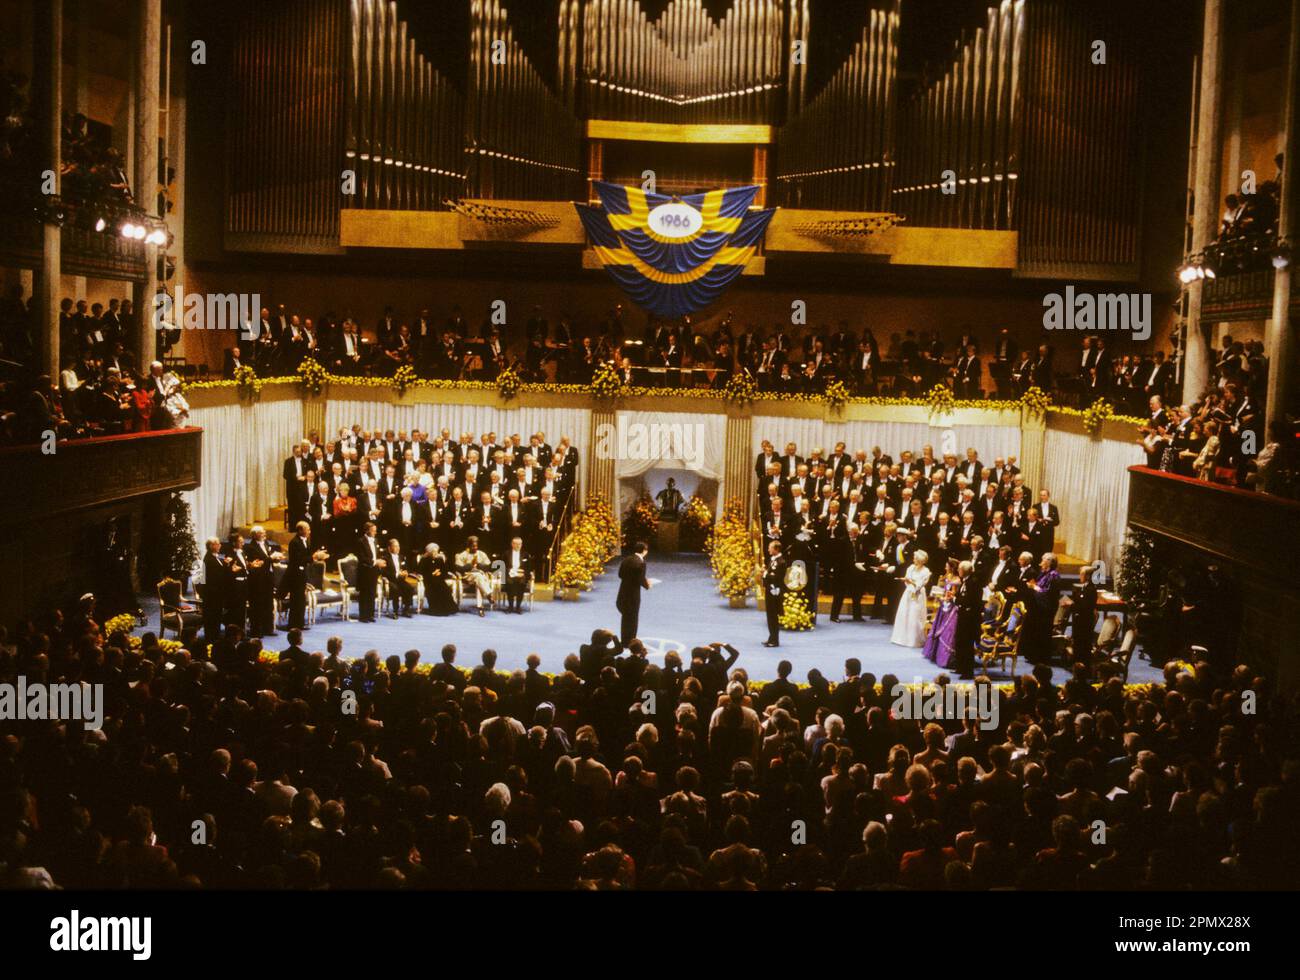 the royal couple OF SWEDEN AT THE NOBEL PRIZE AWARD IN STOCKHOLM CONCERT HALL Stock Photo